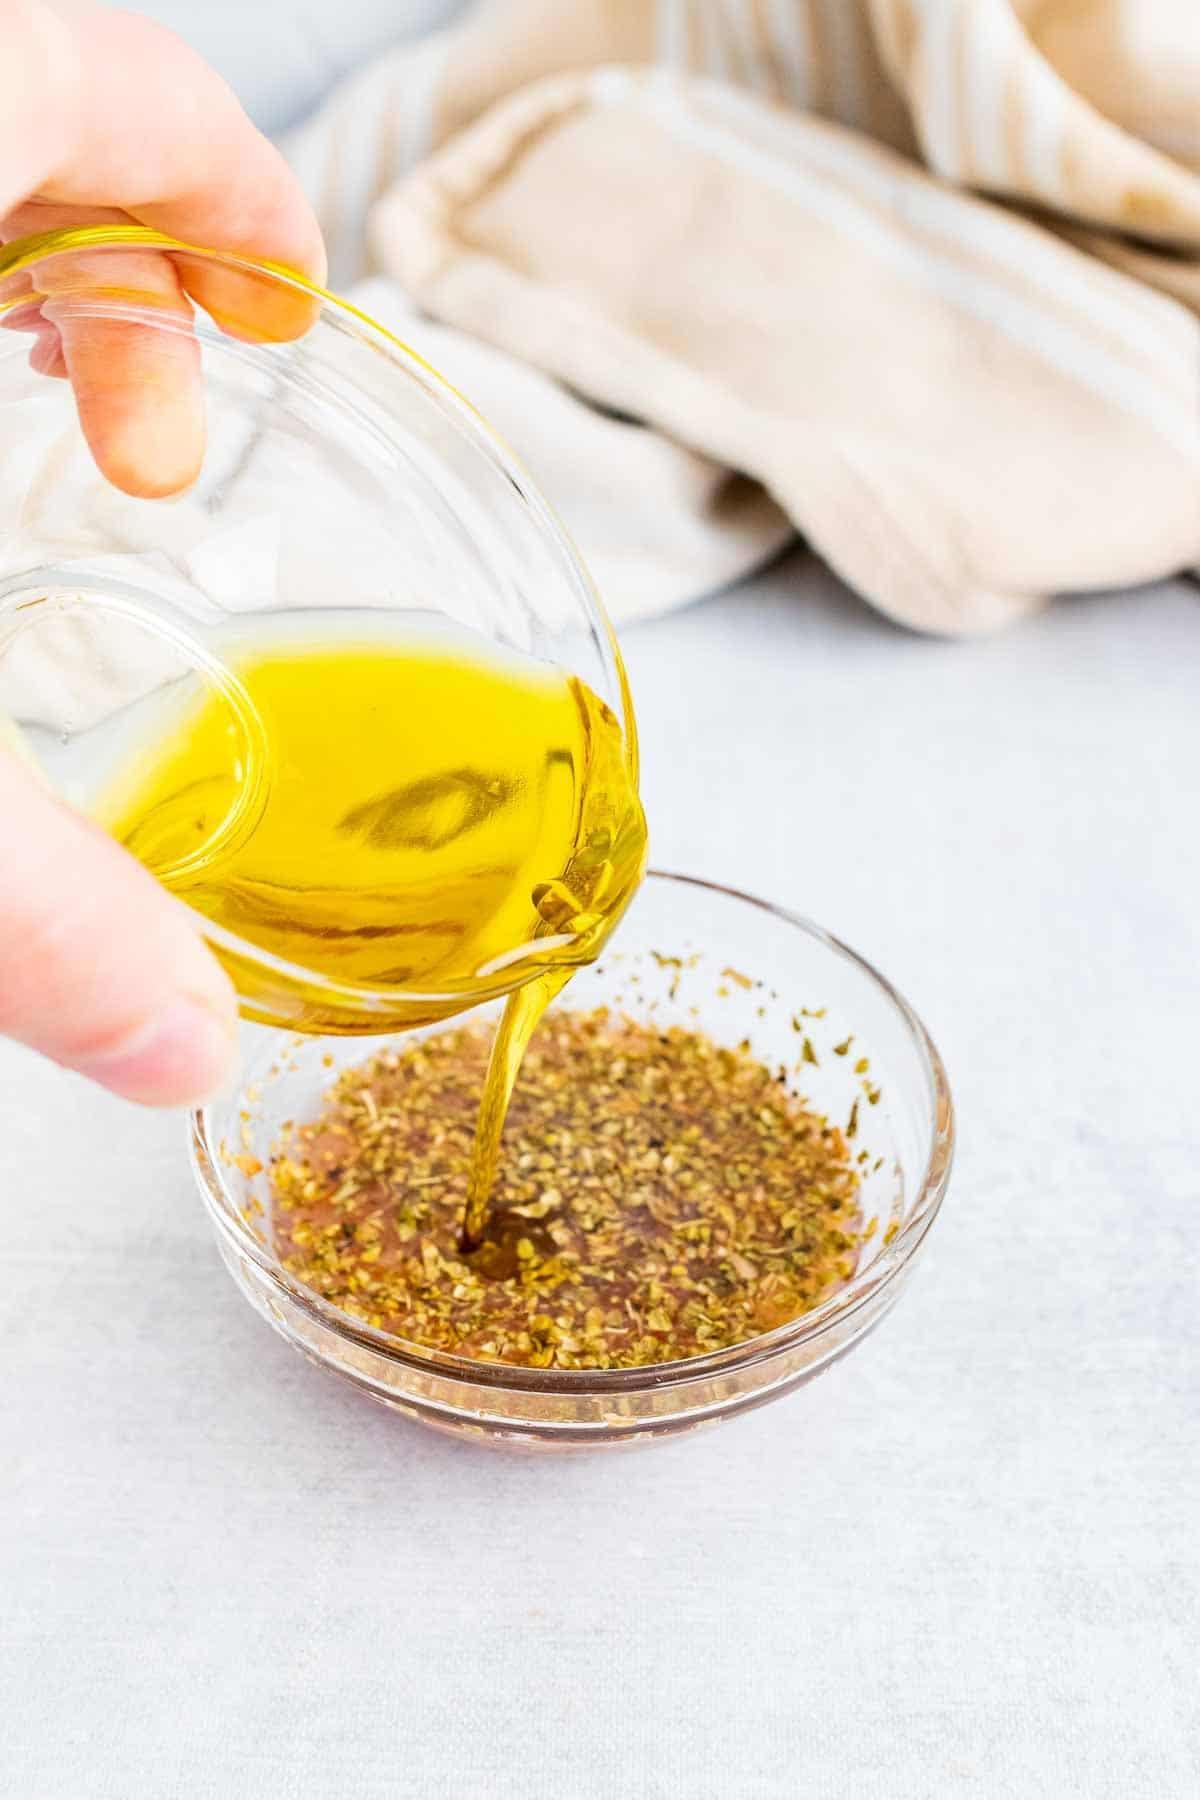 Hand pouring olive oil into the dressing from a glass.